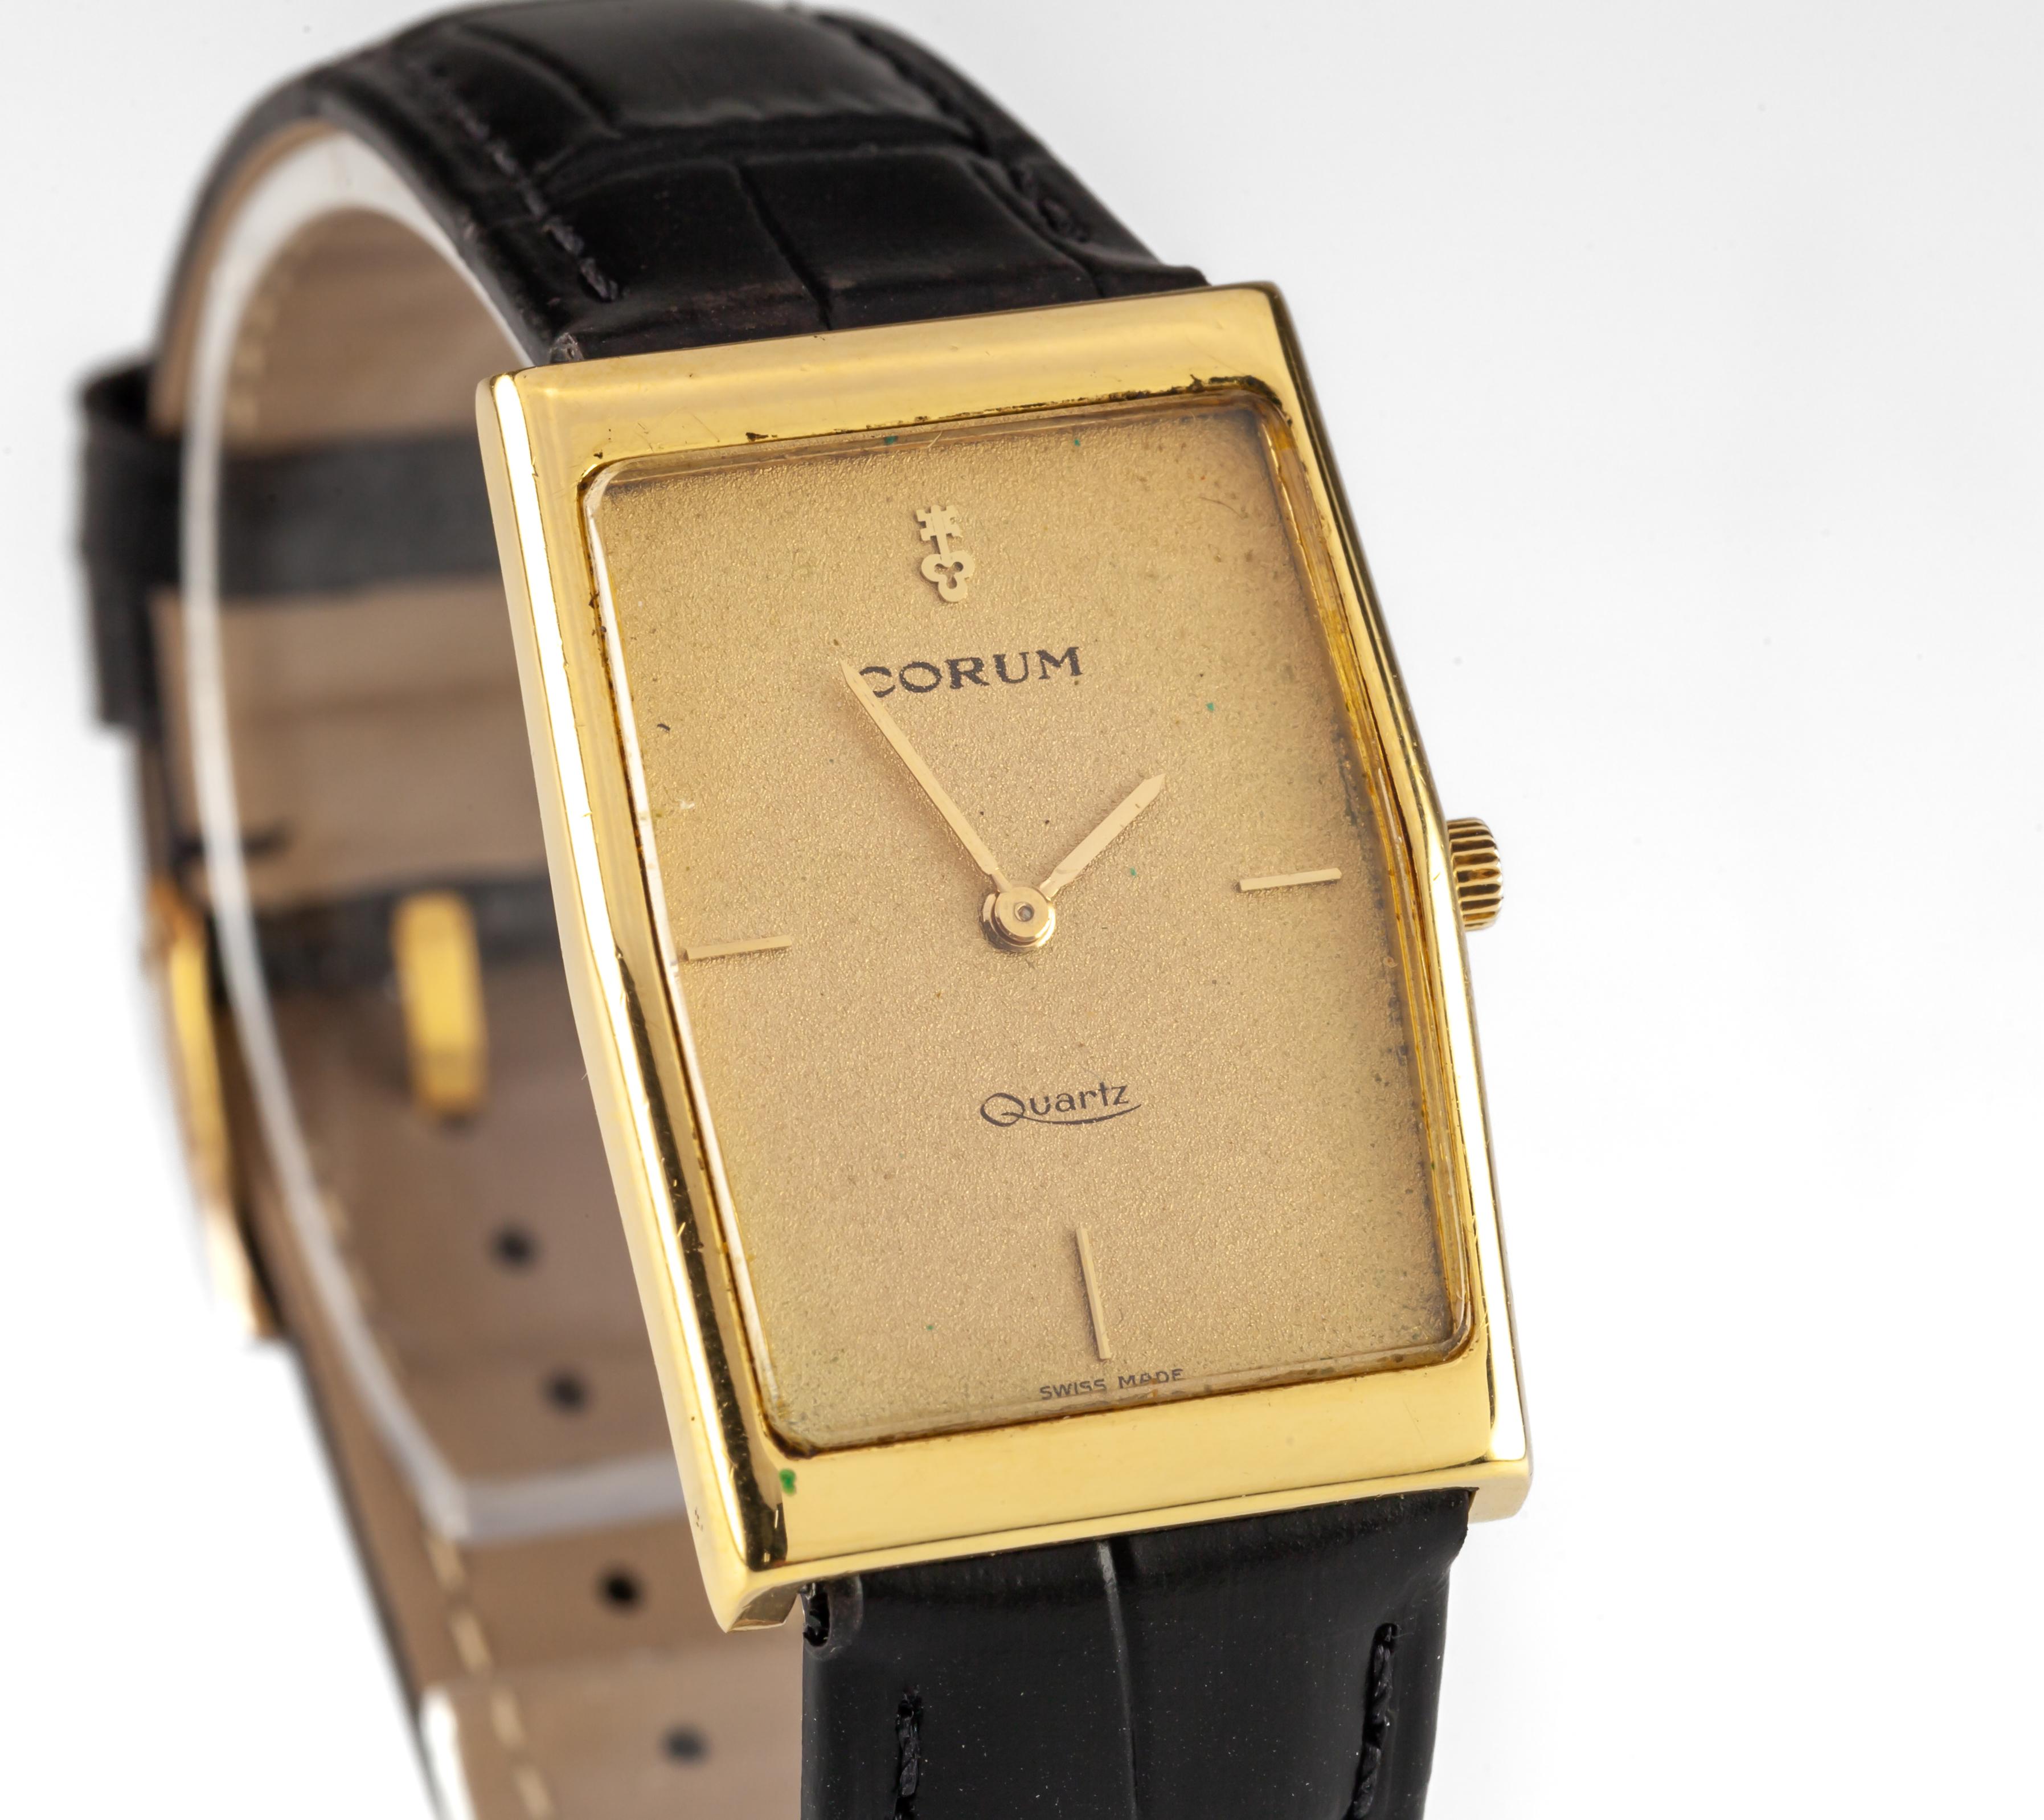 Vintage Corum 18k Gold Watch With Quartz Movement & Black Leather Strap

Serial #: 44107.348851

18K Gold Rectangle Case
23 mm wide (25 mm w/Crown)
32 mm long
Lug-to-Lug Distance: 28 mm
Lug-to-Lug Width: 16 mm
Thickness: 5 mm

Champagne Dial w/Gold